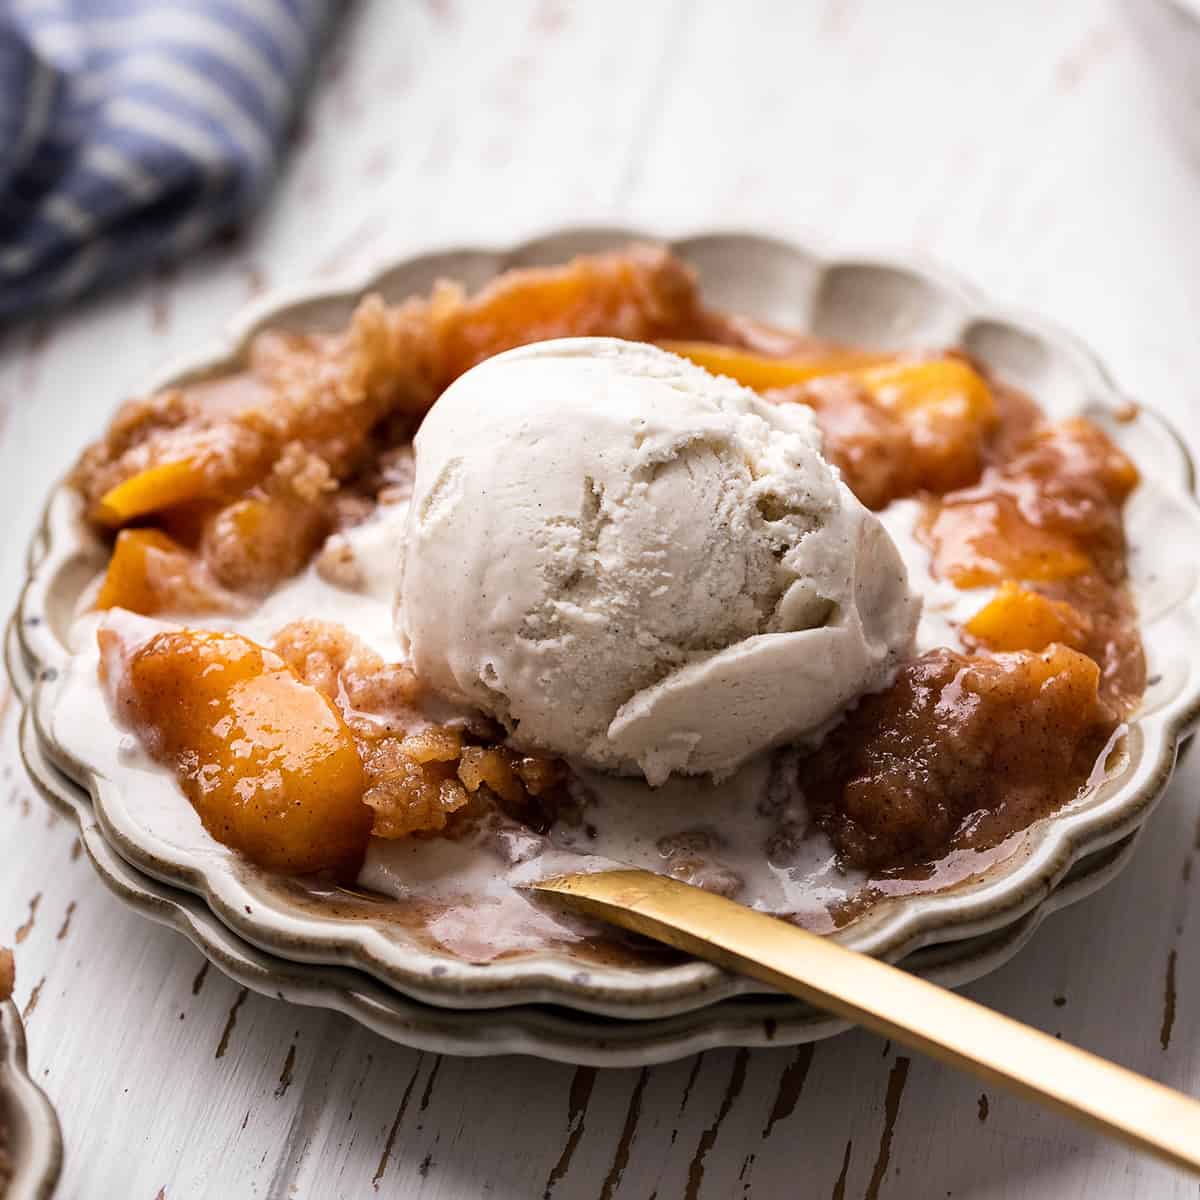 Peach Crumble Recipe on a plate with ice cream